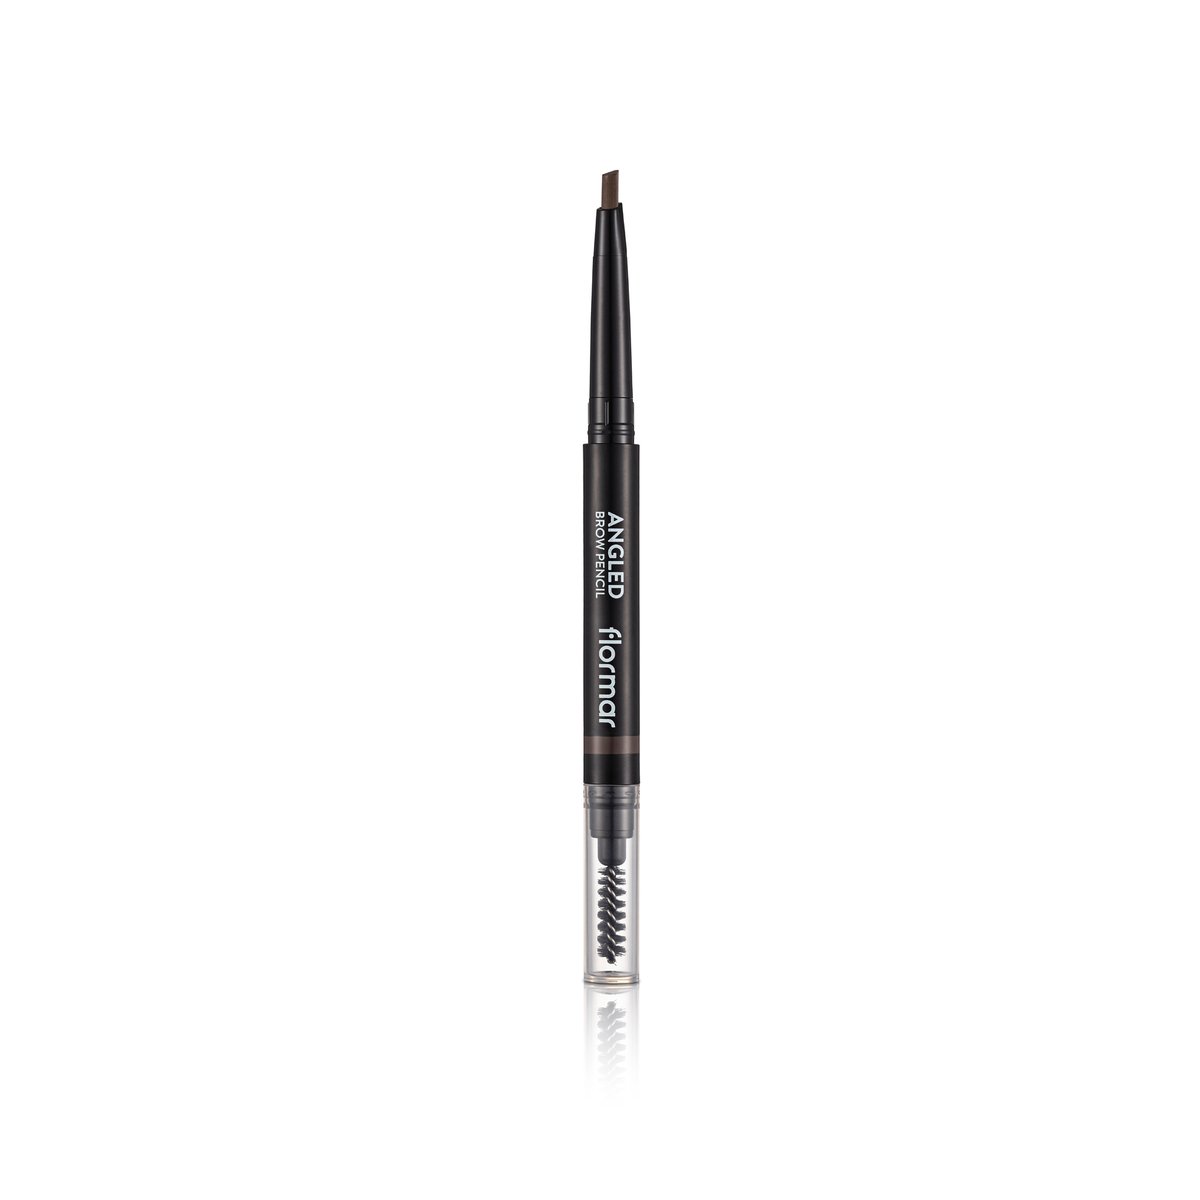 Flormar Angled Brow Pencil - 01 Beige 1pc